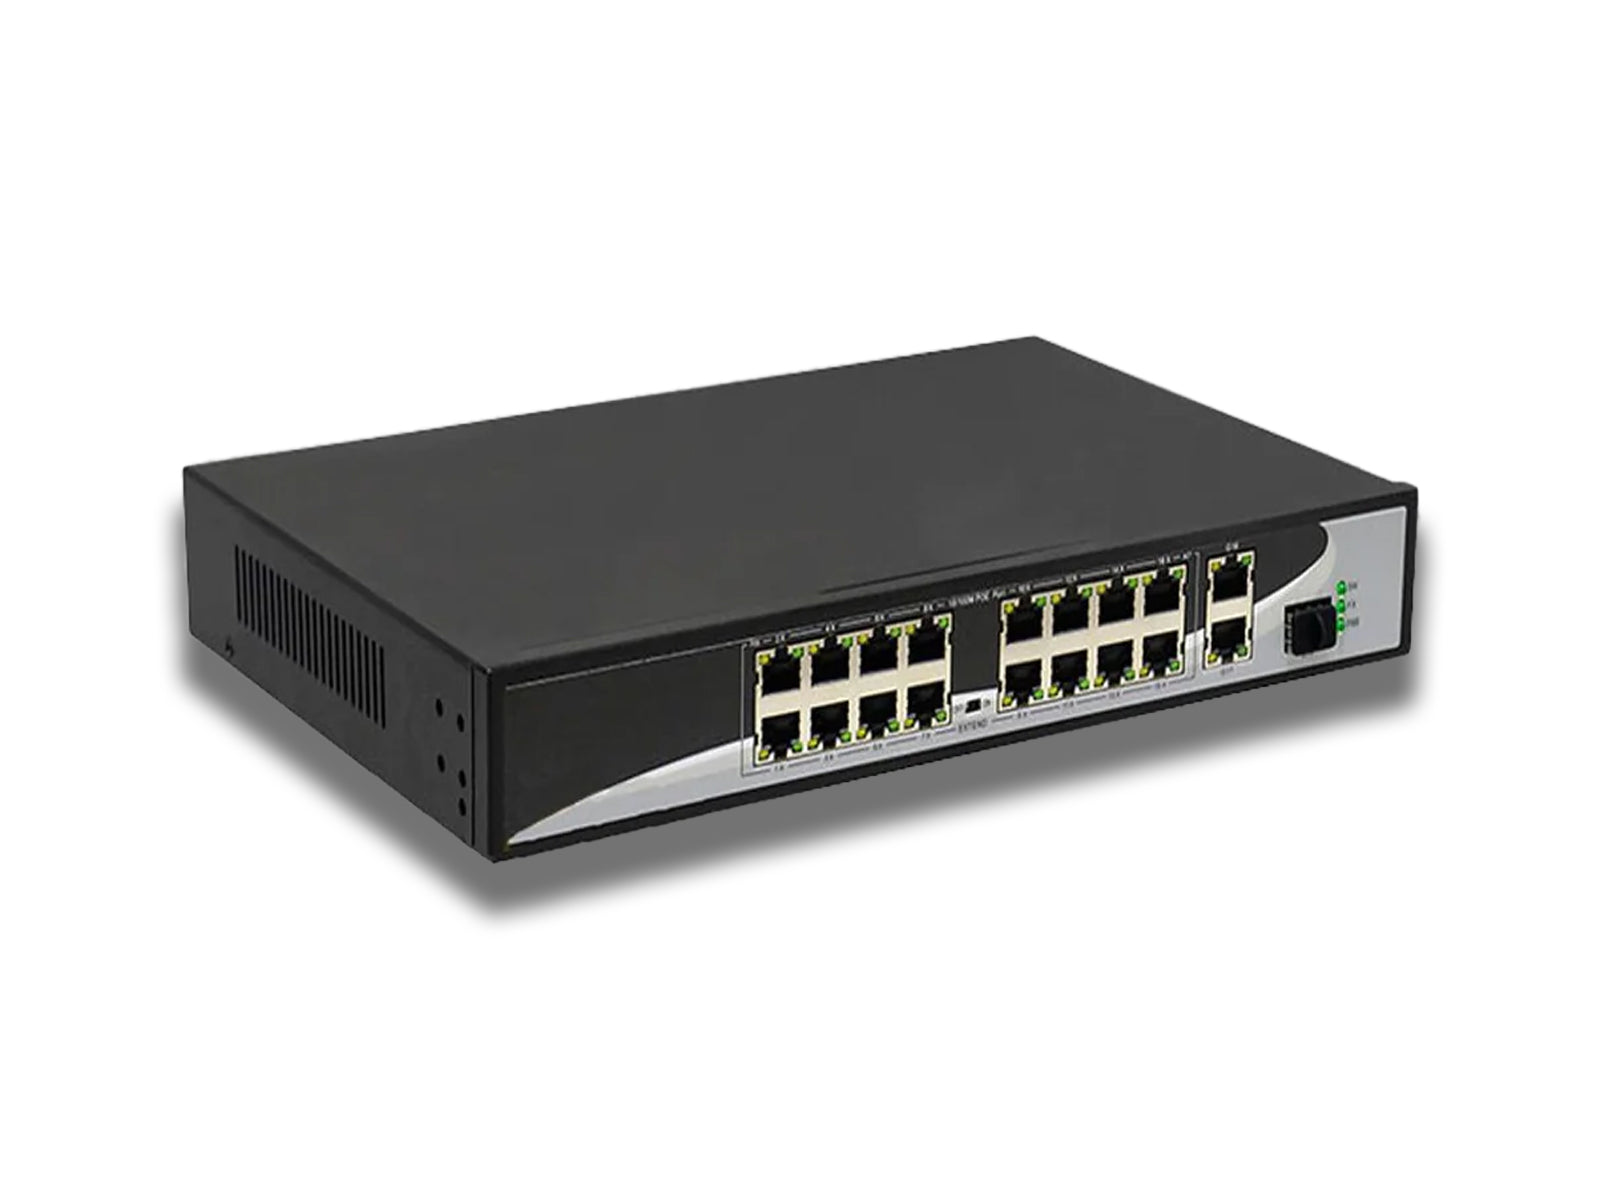 16 Port Network Switch Box Showing Ports